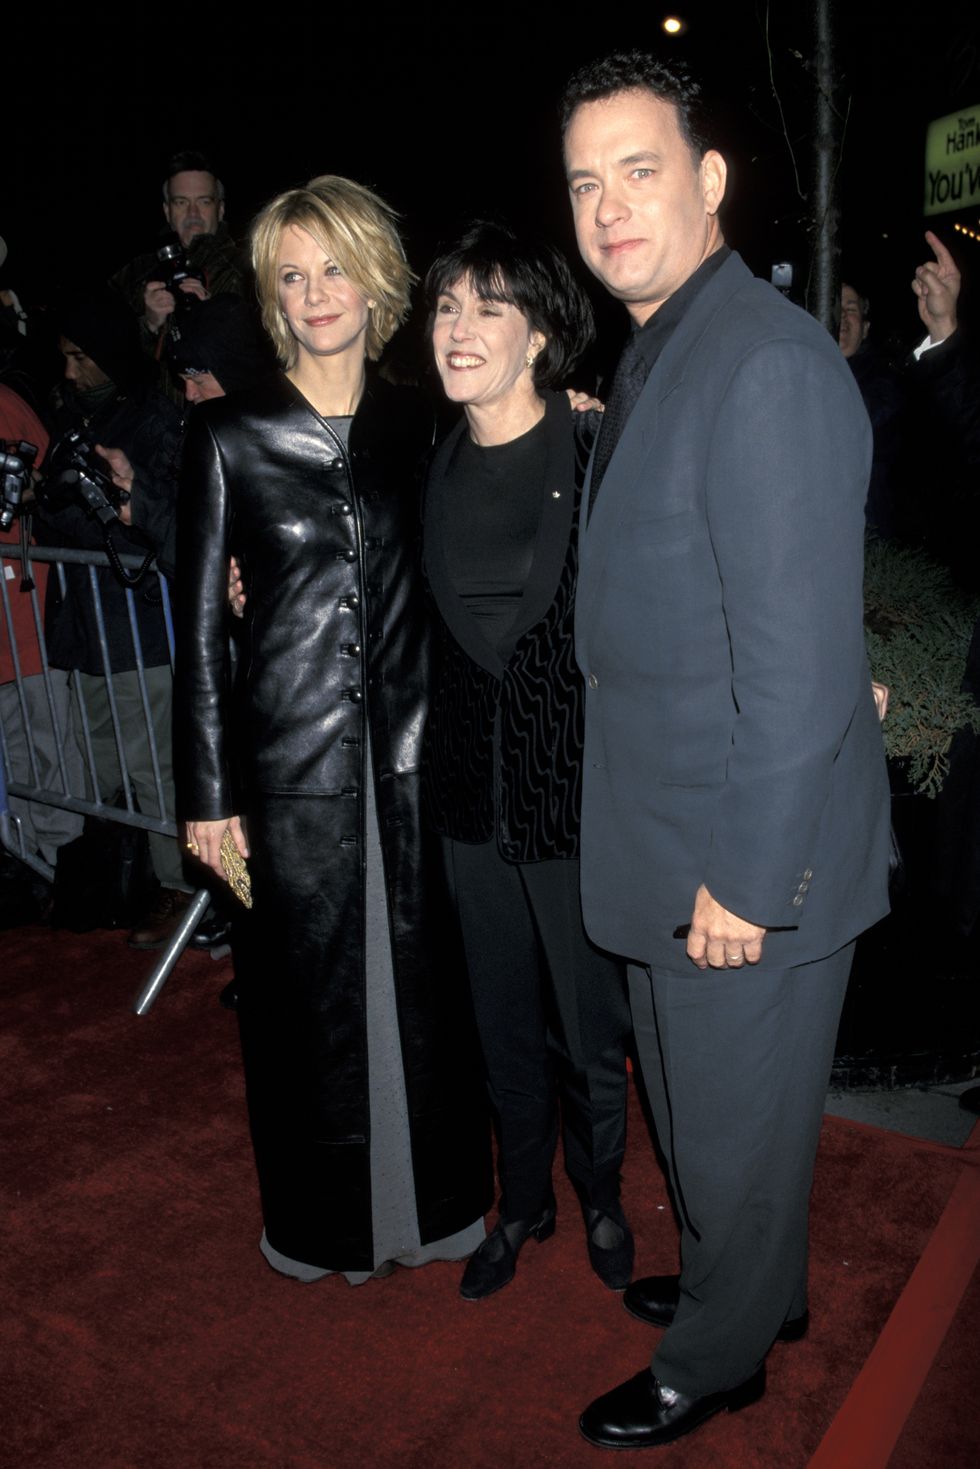 meg ryan nora ephron and tom hanks at the you've got mail premiere in new york